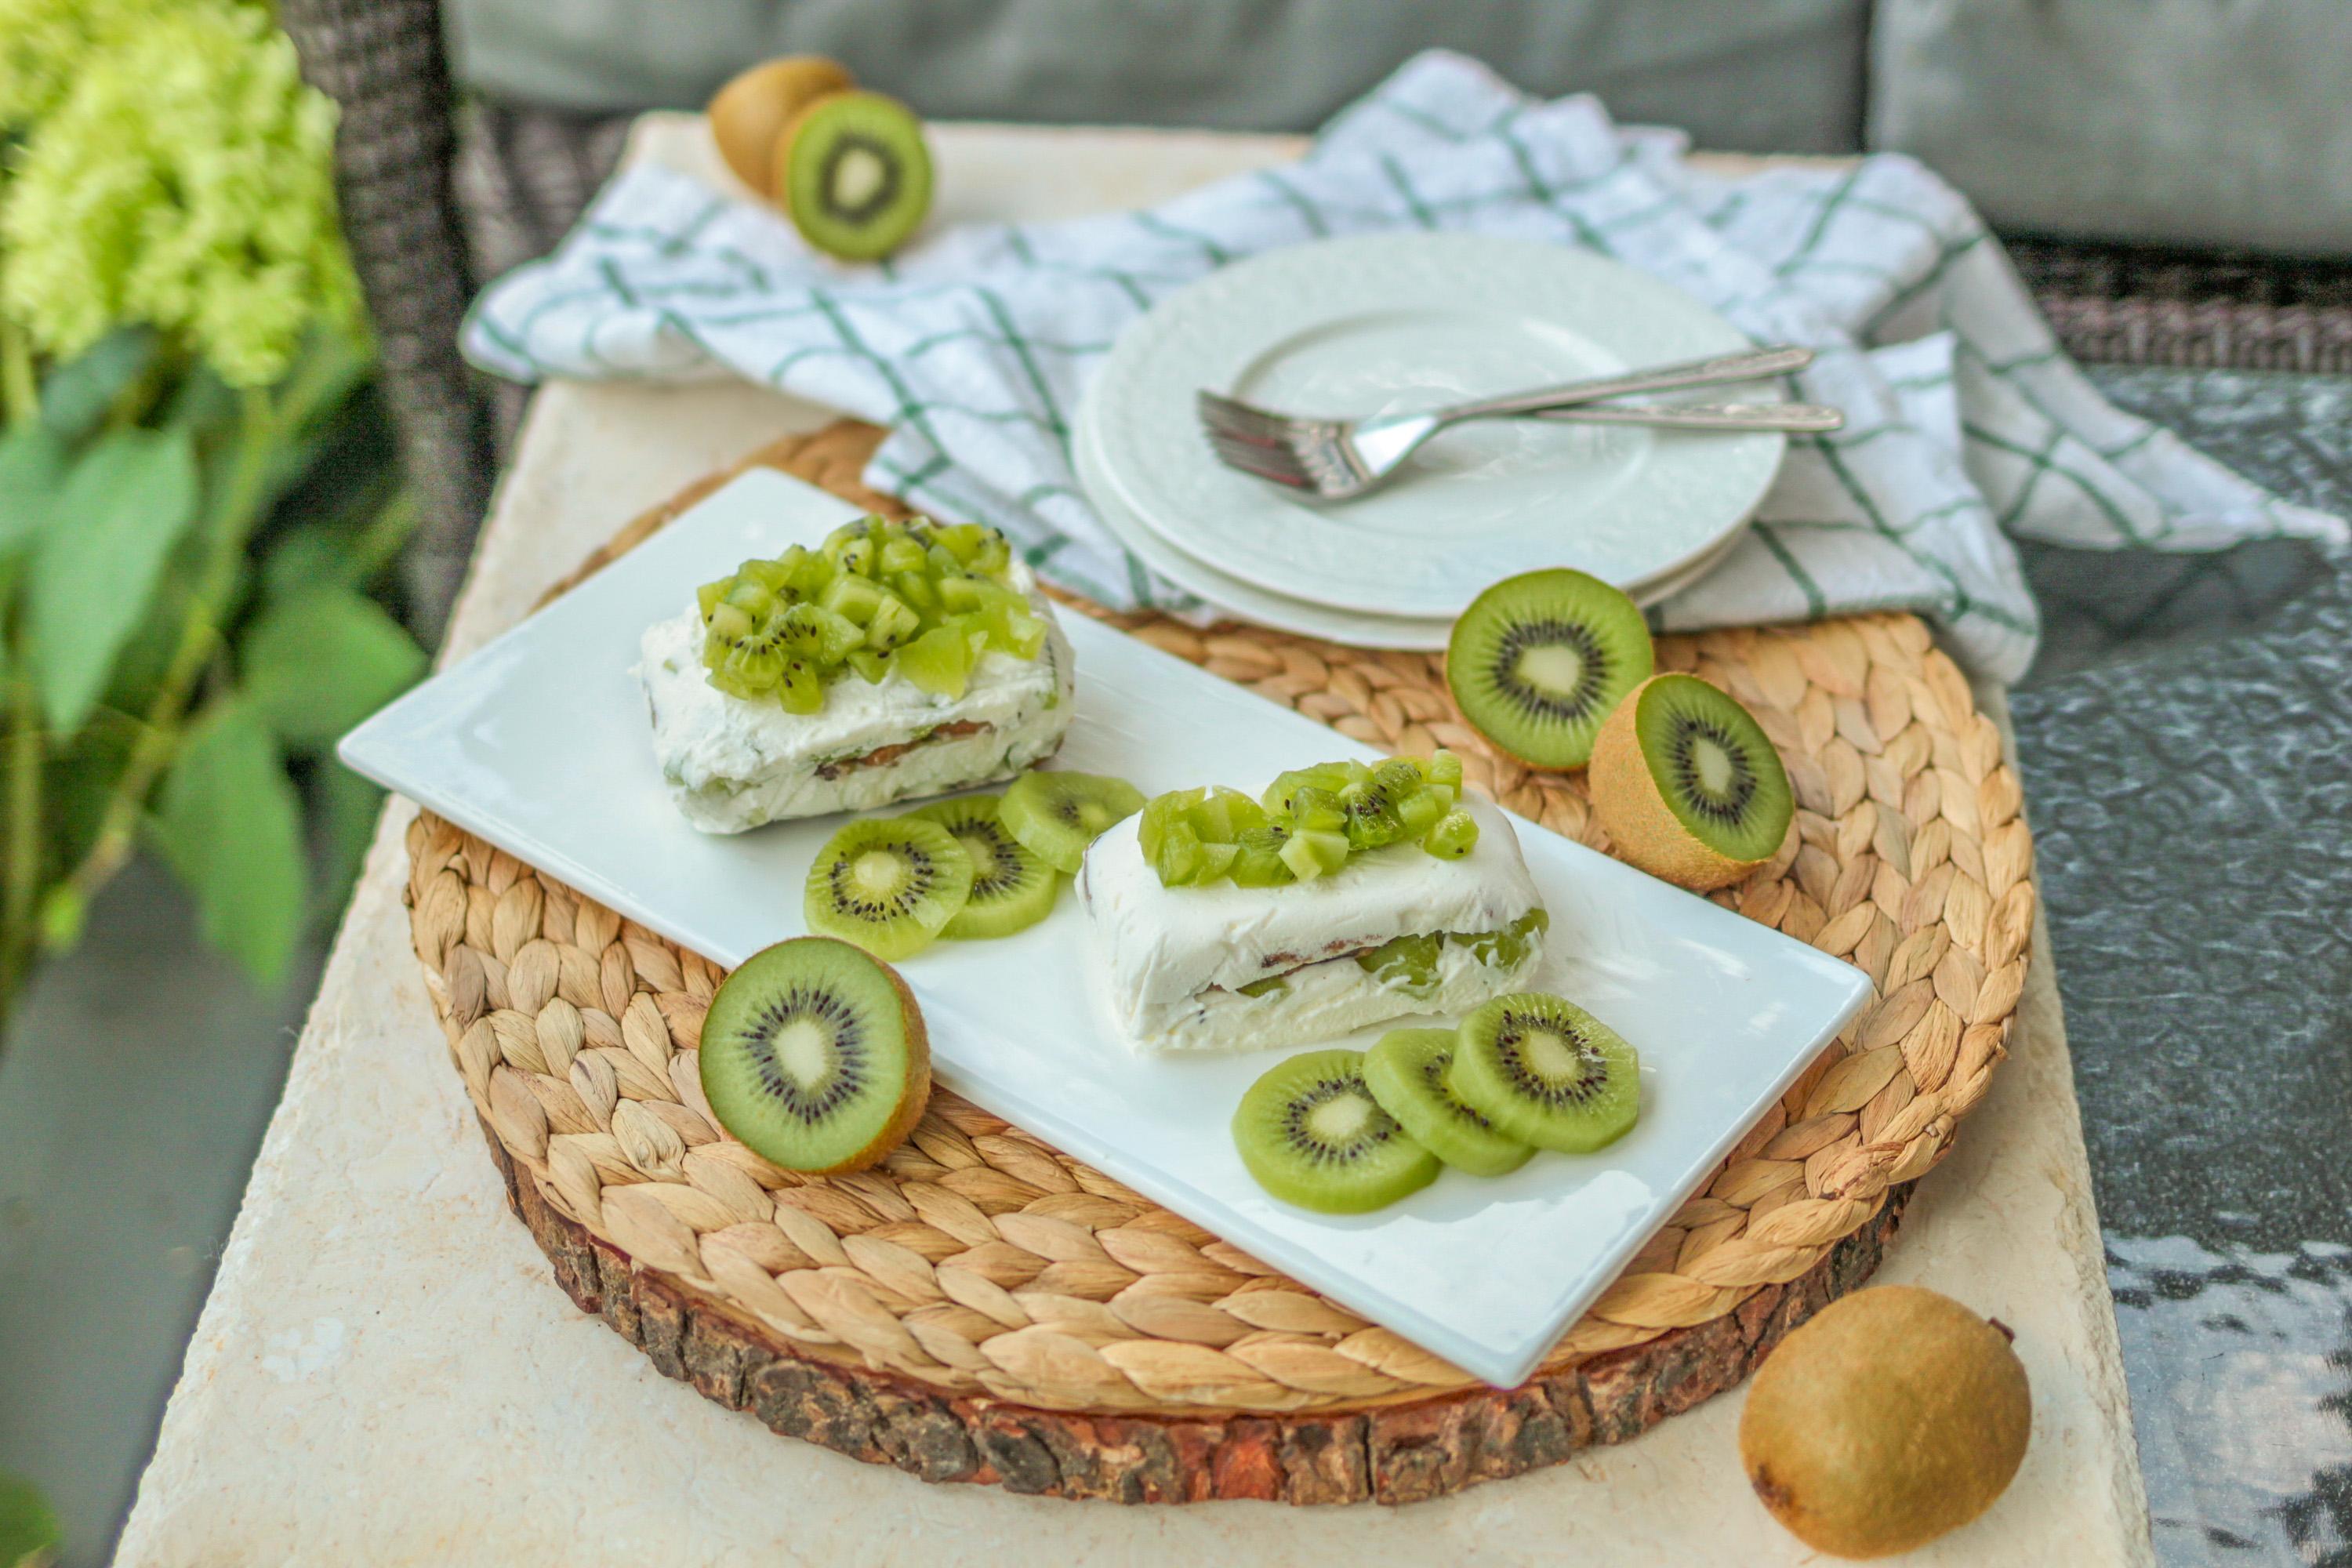 Sweeten Your Summer With Kiwis from Chile